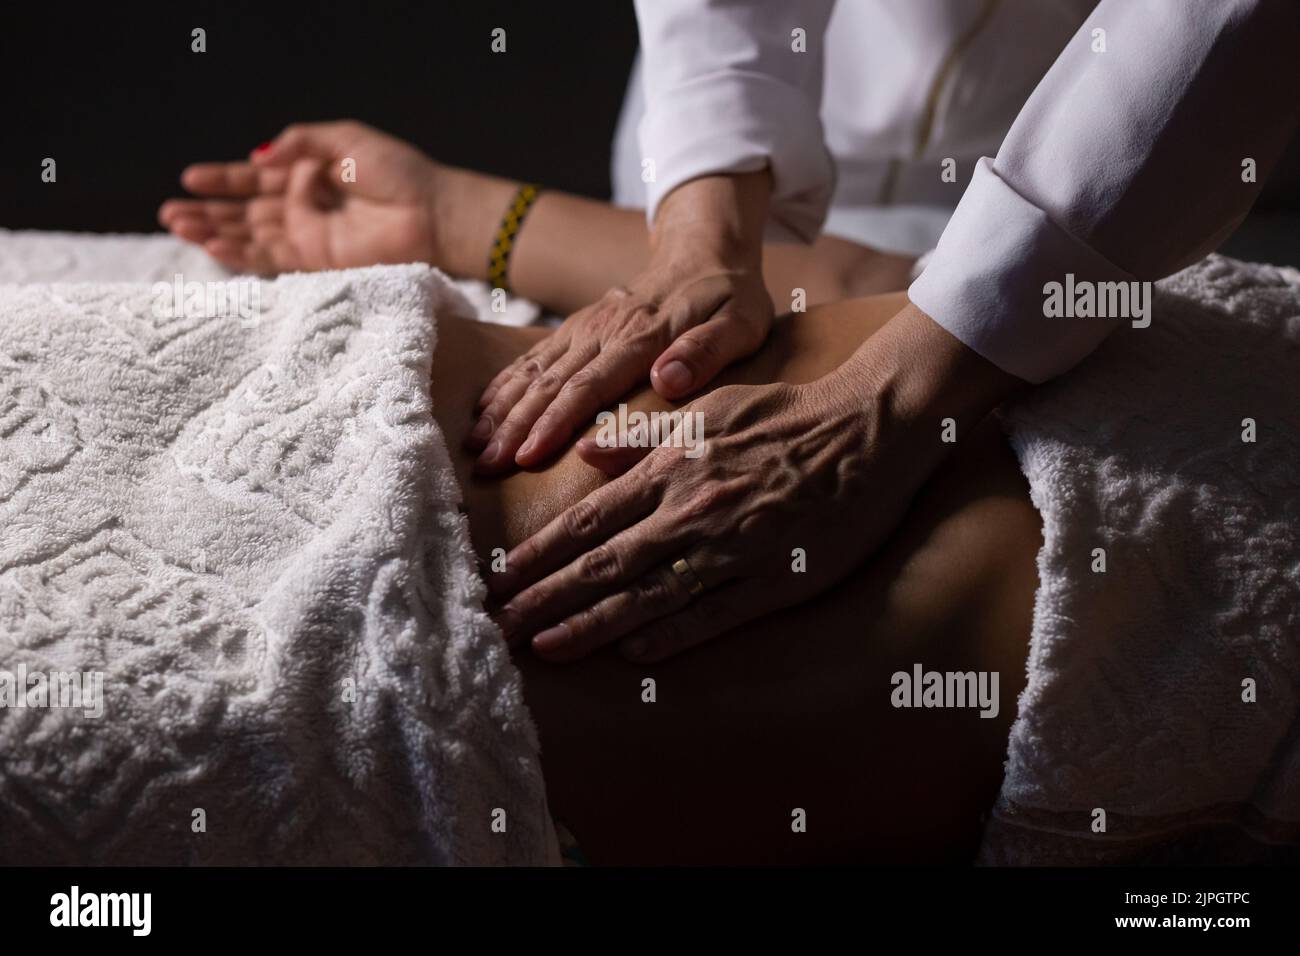 Goiânia, Goias, Brazil – July 18, 2022: Closeup of massage therapist hands applying therapeutic massage on a patient's belly. Stock Photo